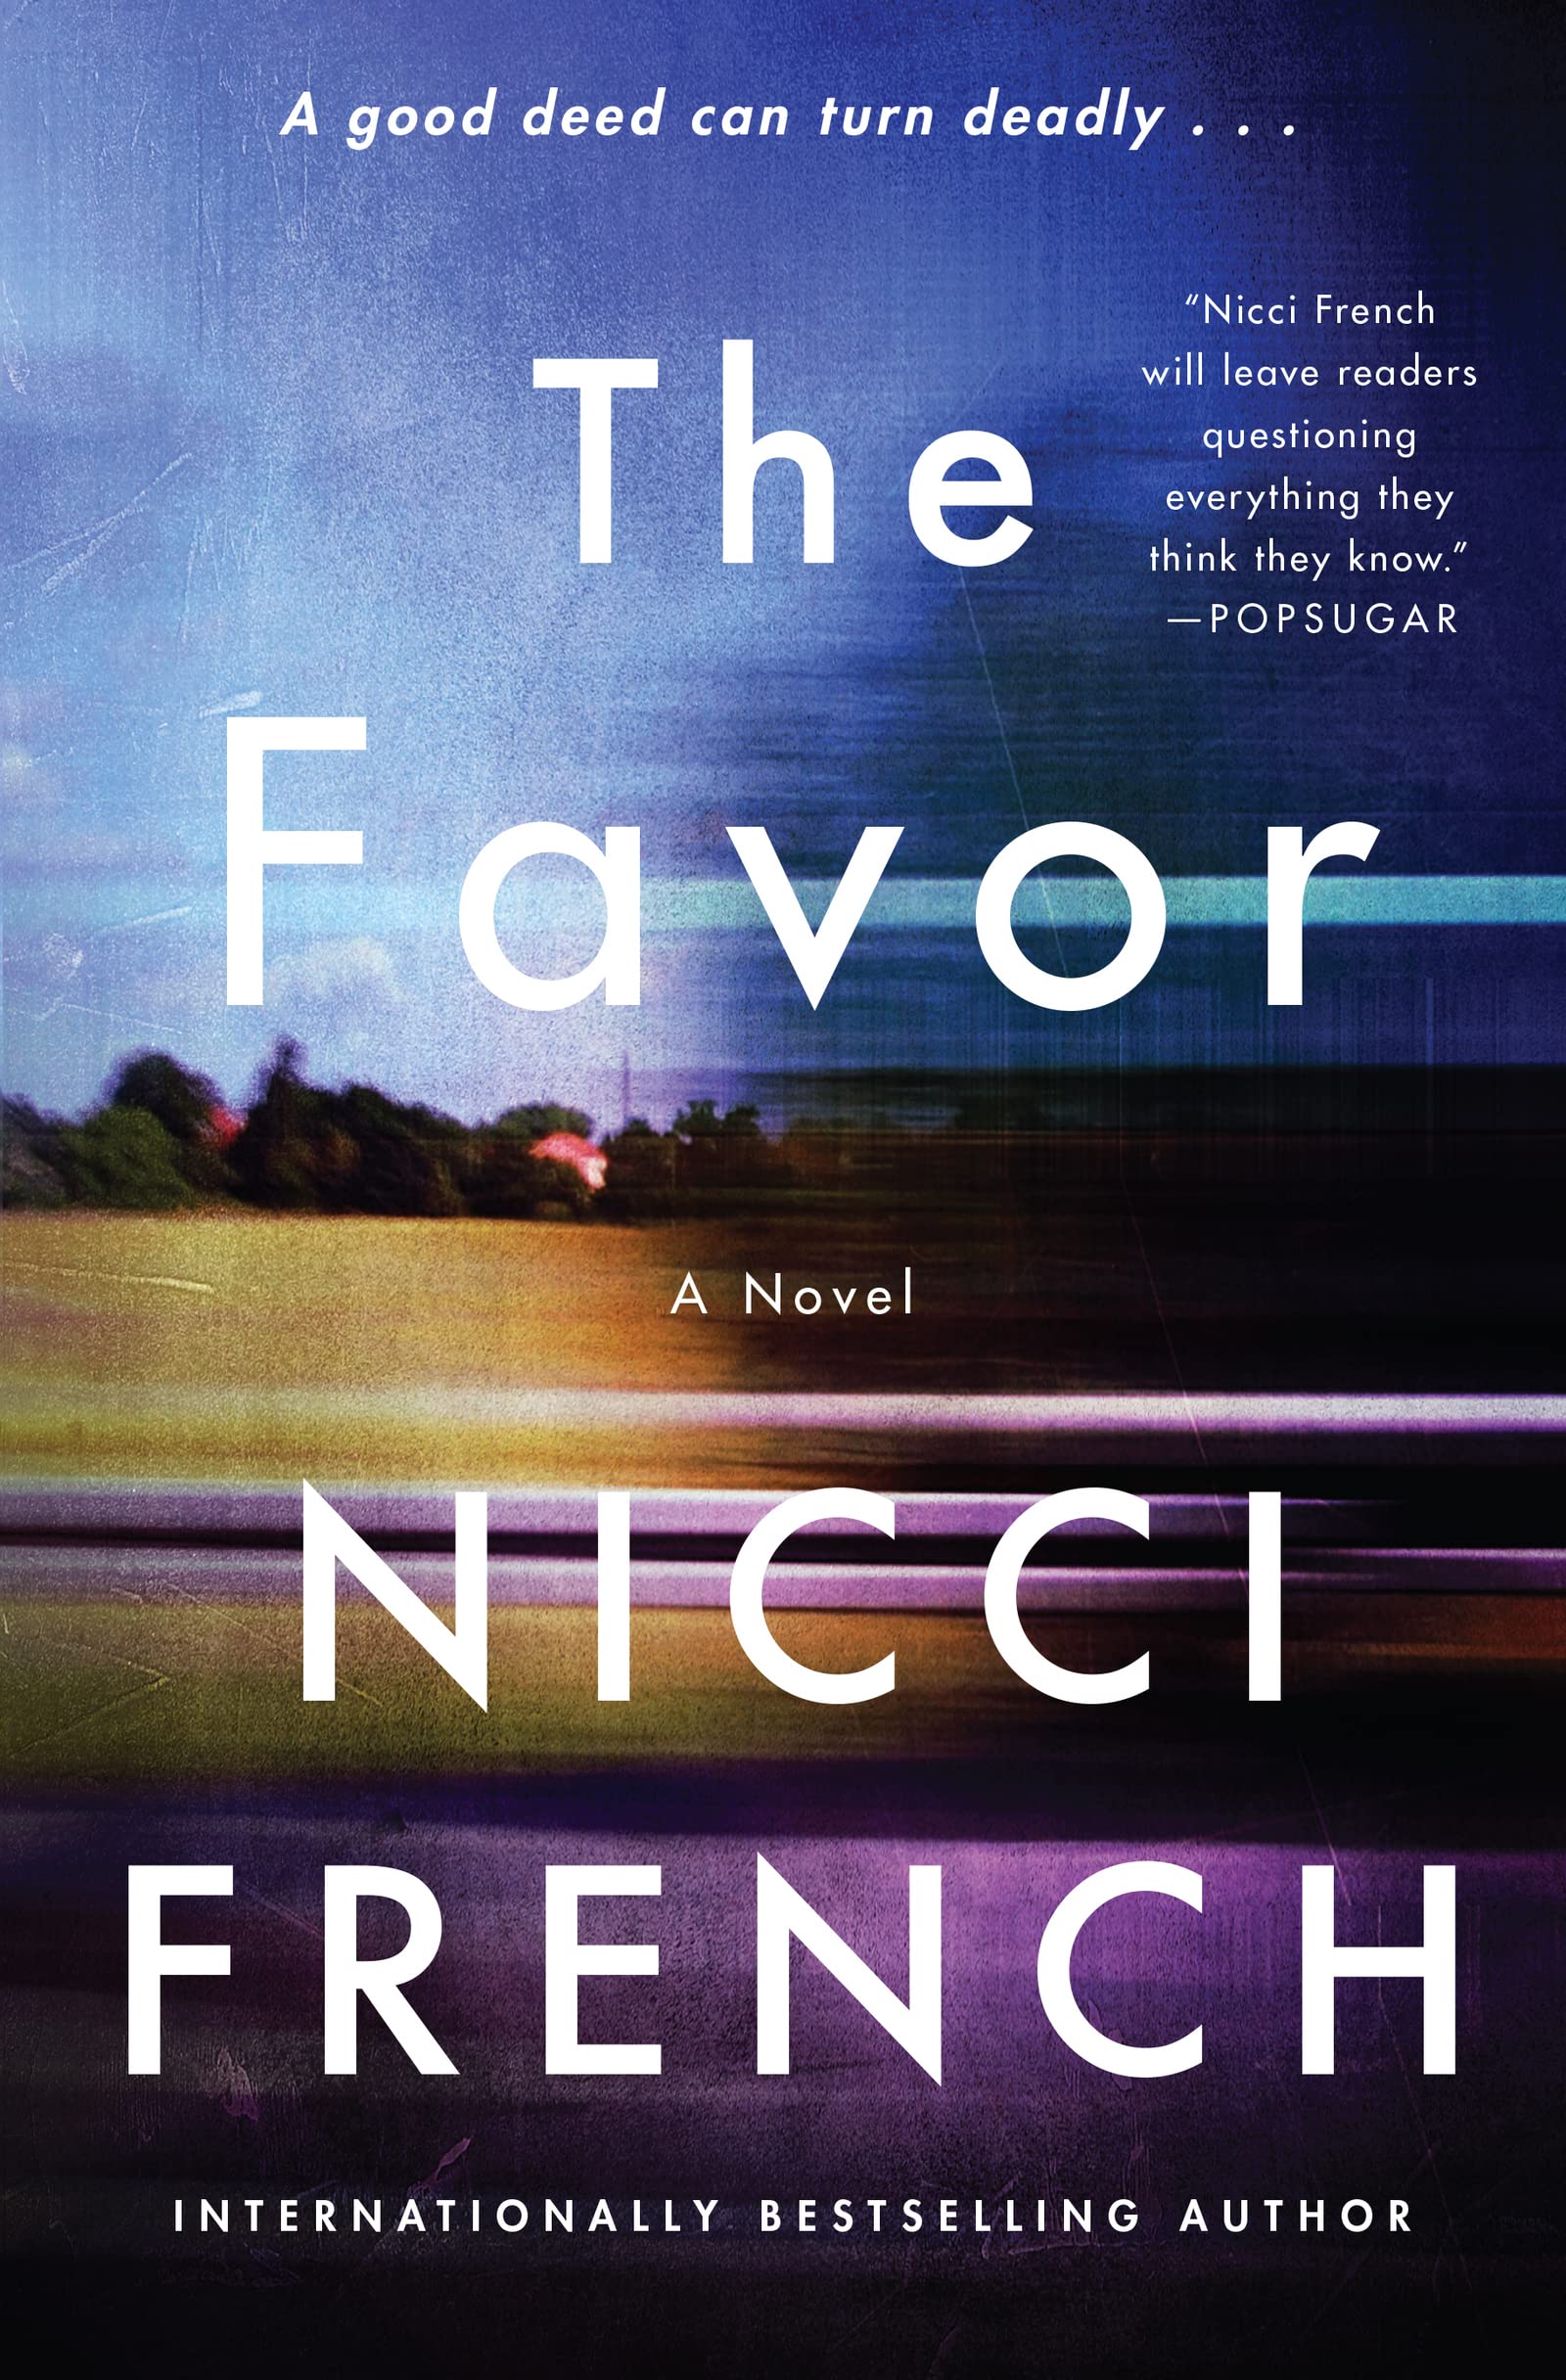 Image for "The Favor"